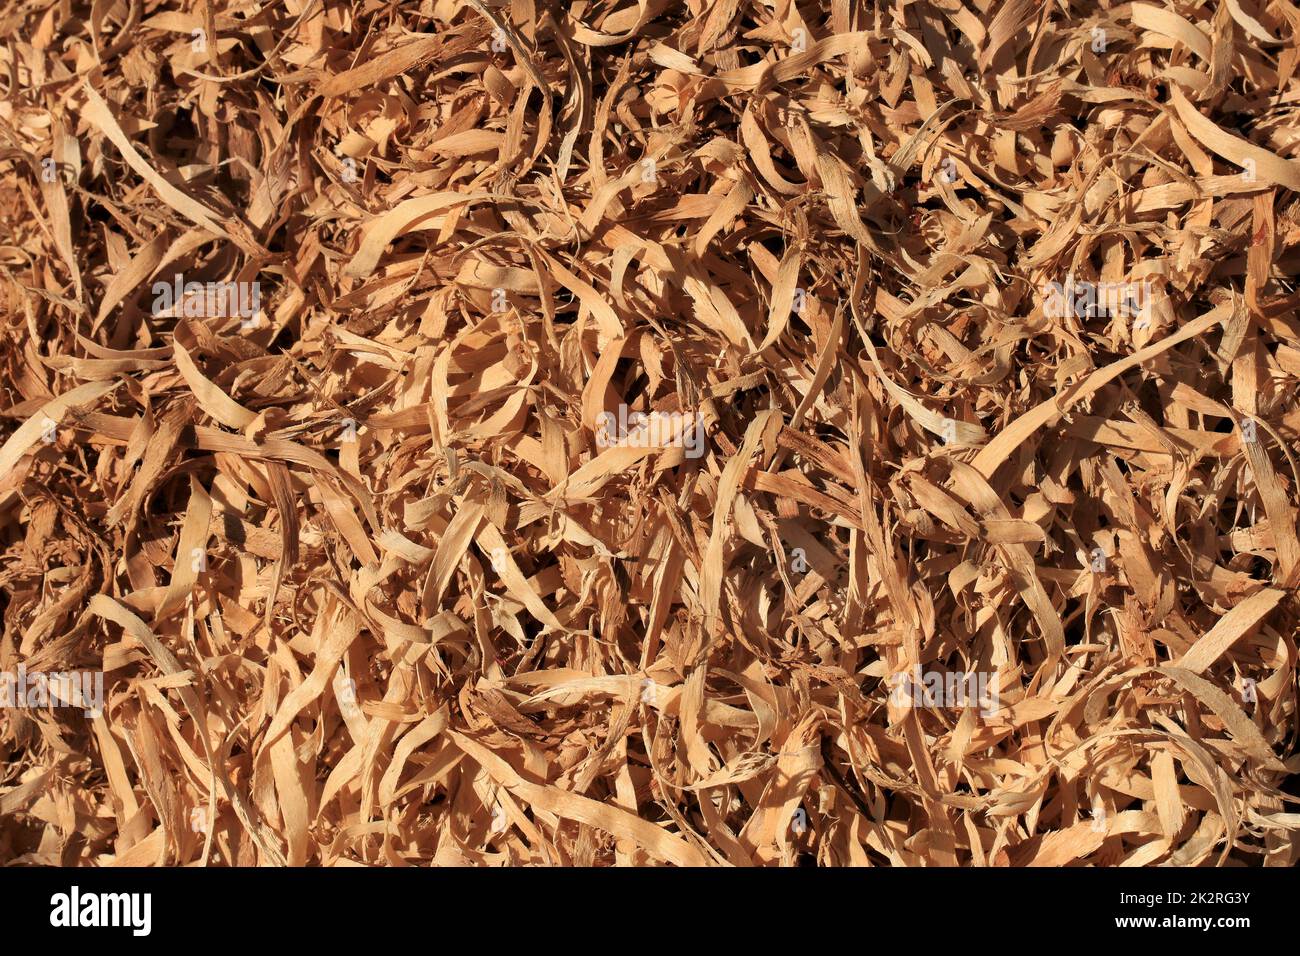 Sawdust, wood shavings made from a chainsaw in wet wood Stock Photo